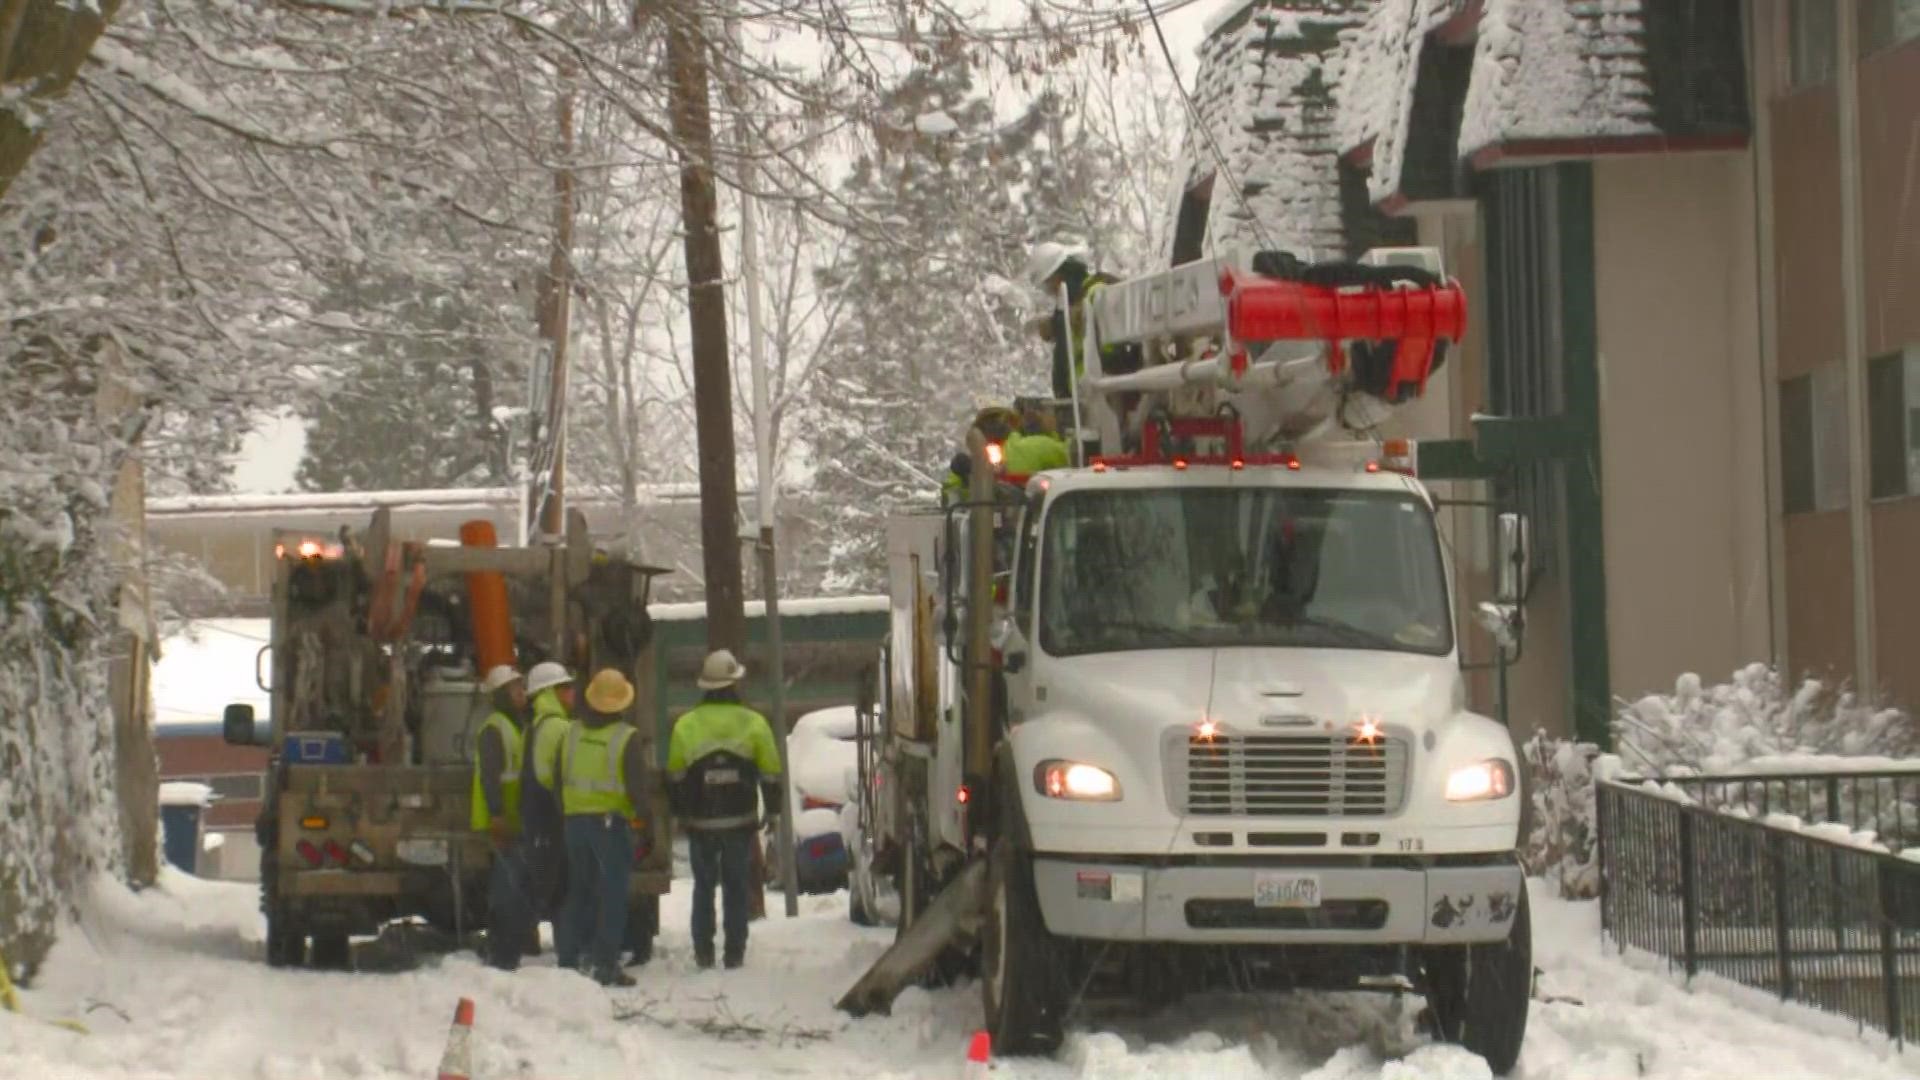 Avista is working to repair a powerline that came down on Maple Street on Tuesday morning.